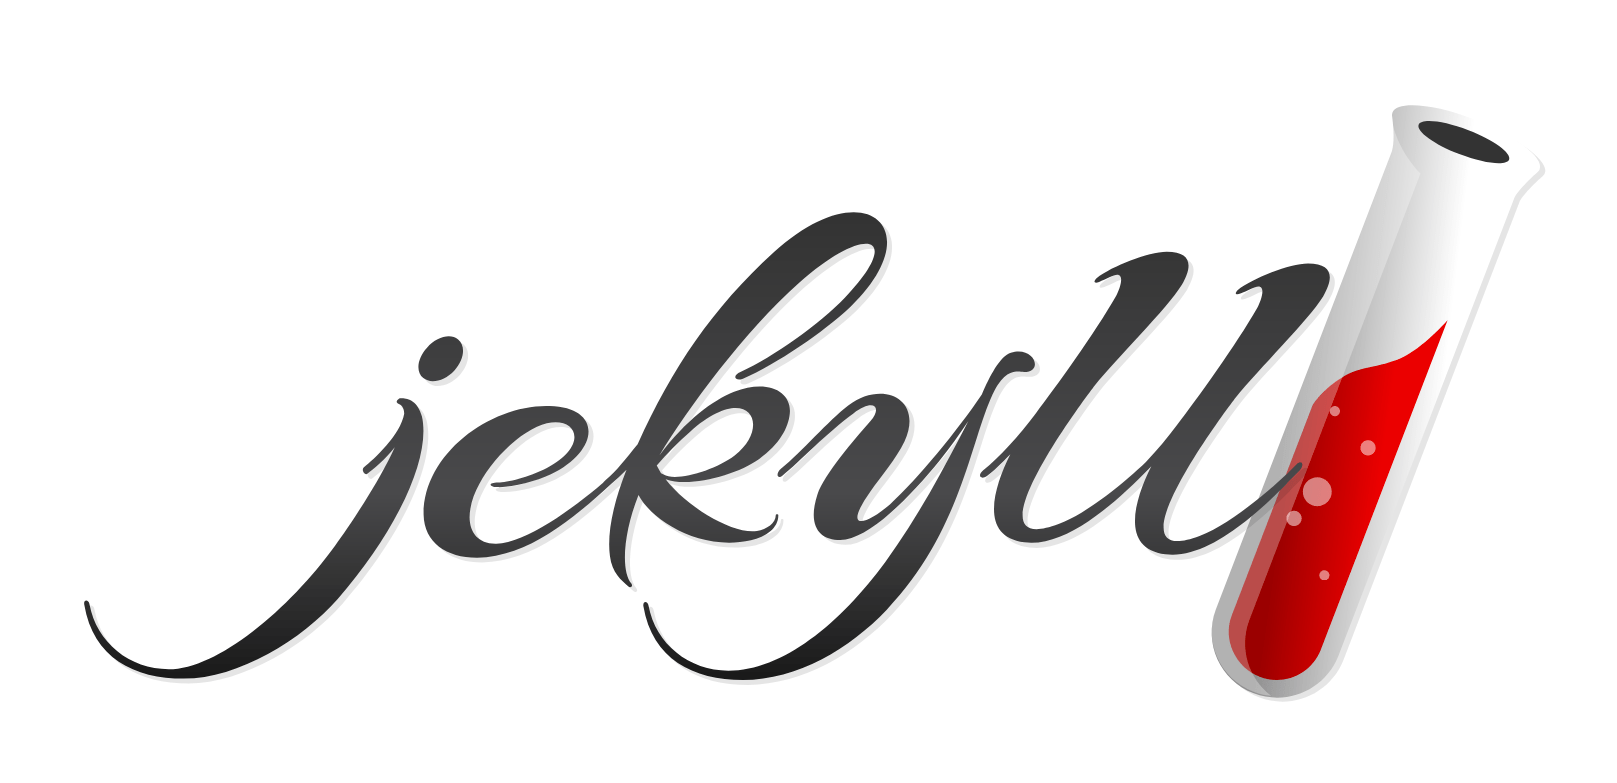 How I set up this blog on Jekyll